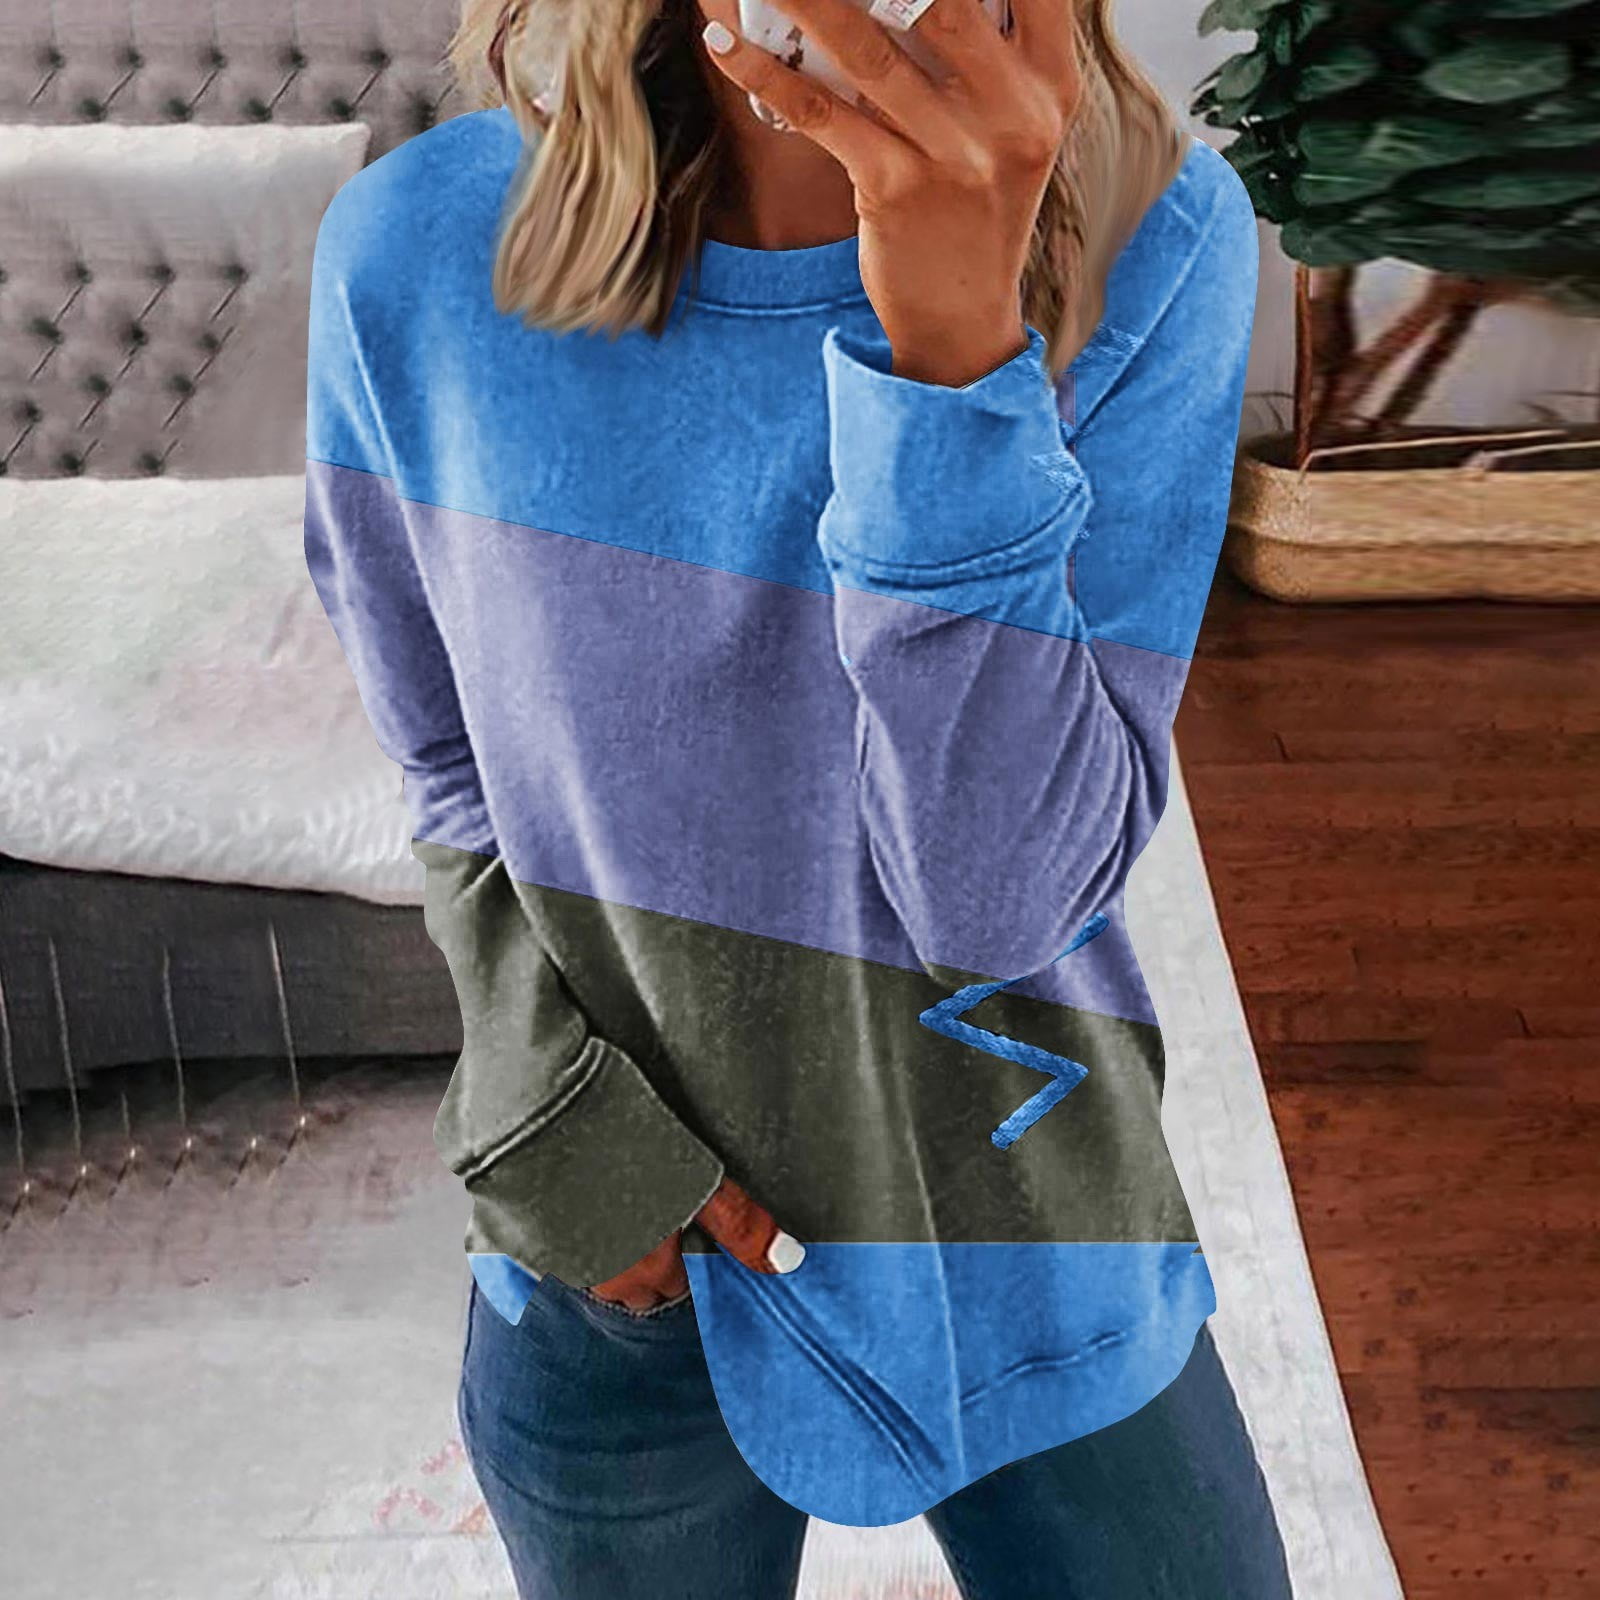 Ydkzymd Womens Long Sleeve Casual Solid Color Kuwait